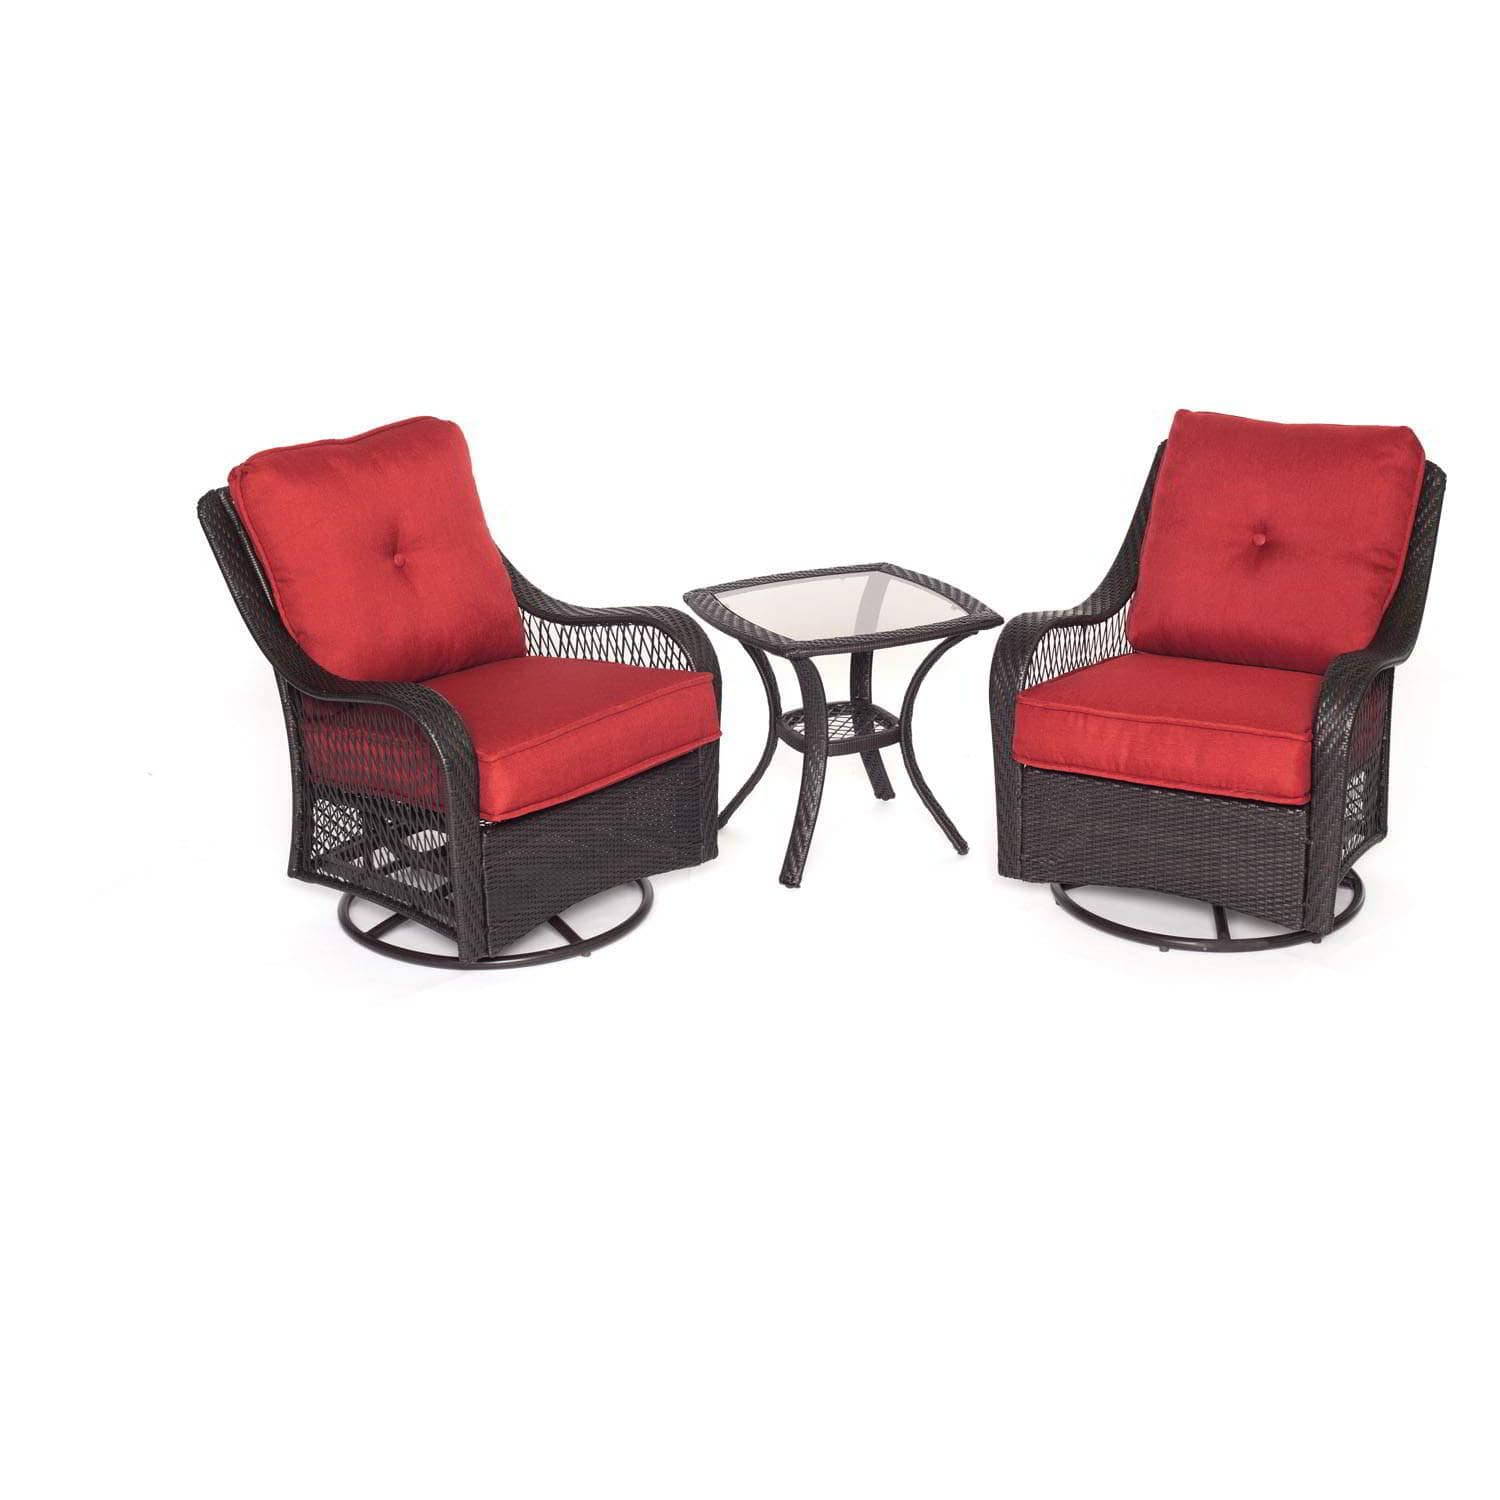 Hanover Conversation Set Hanover Orleans 3-Piece Swivel Gliding Chat Set in Autumn Berry